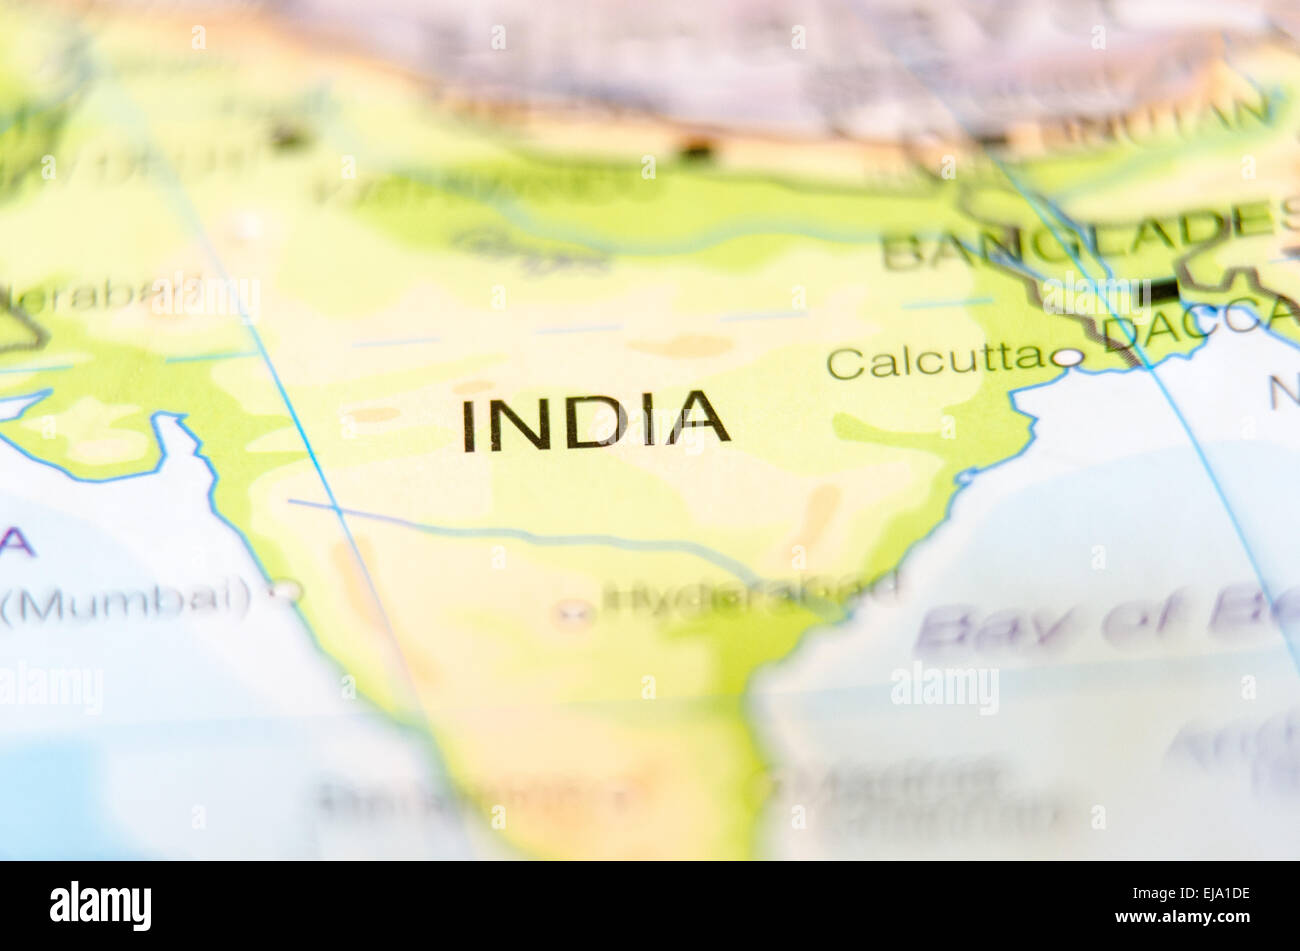 india country on map Stock Photo